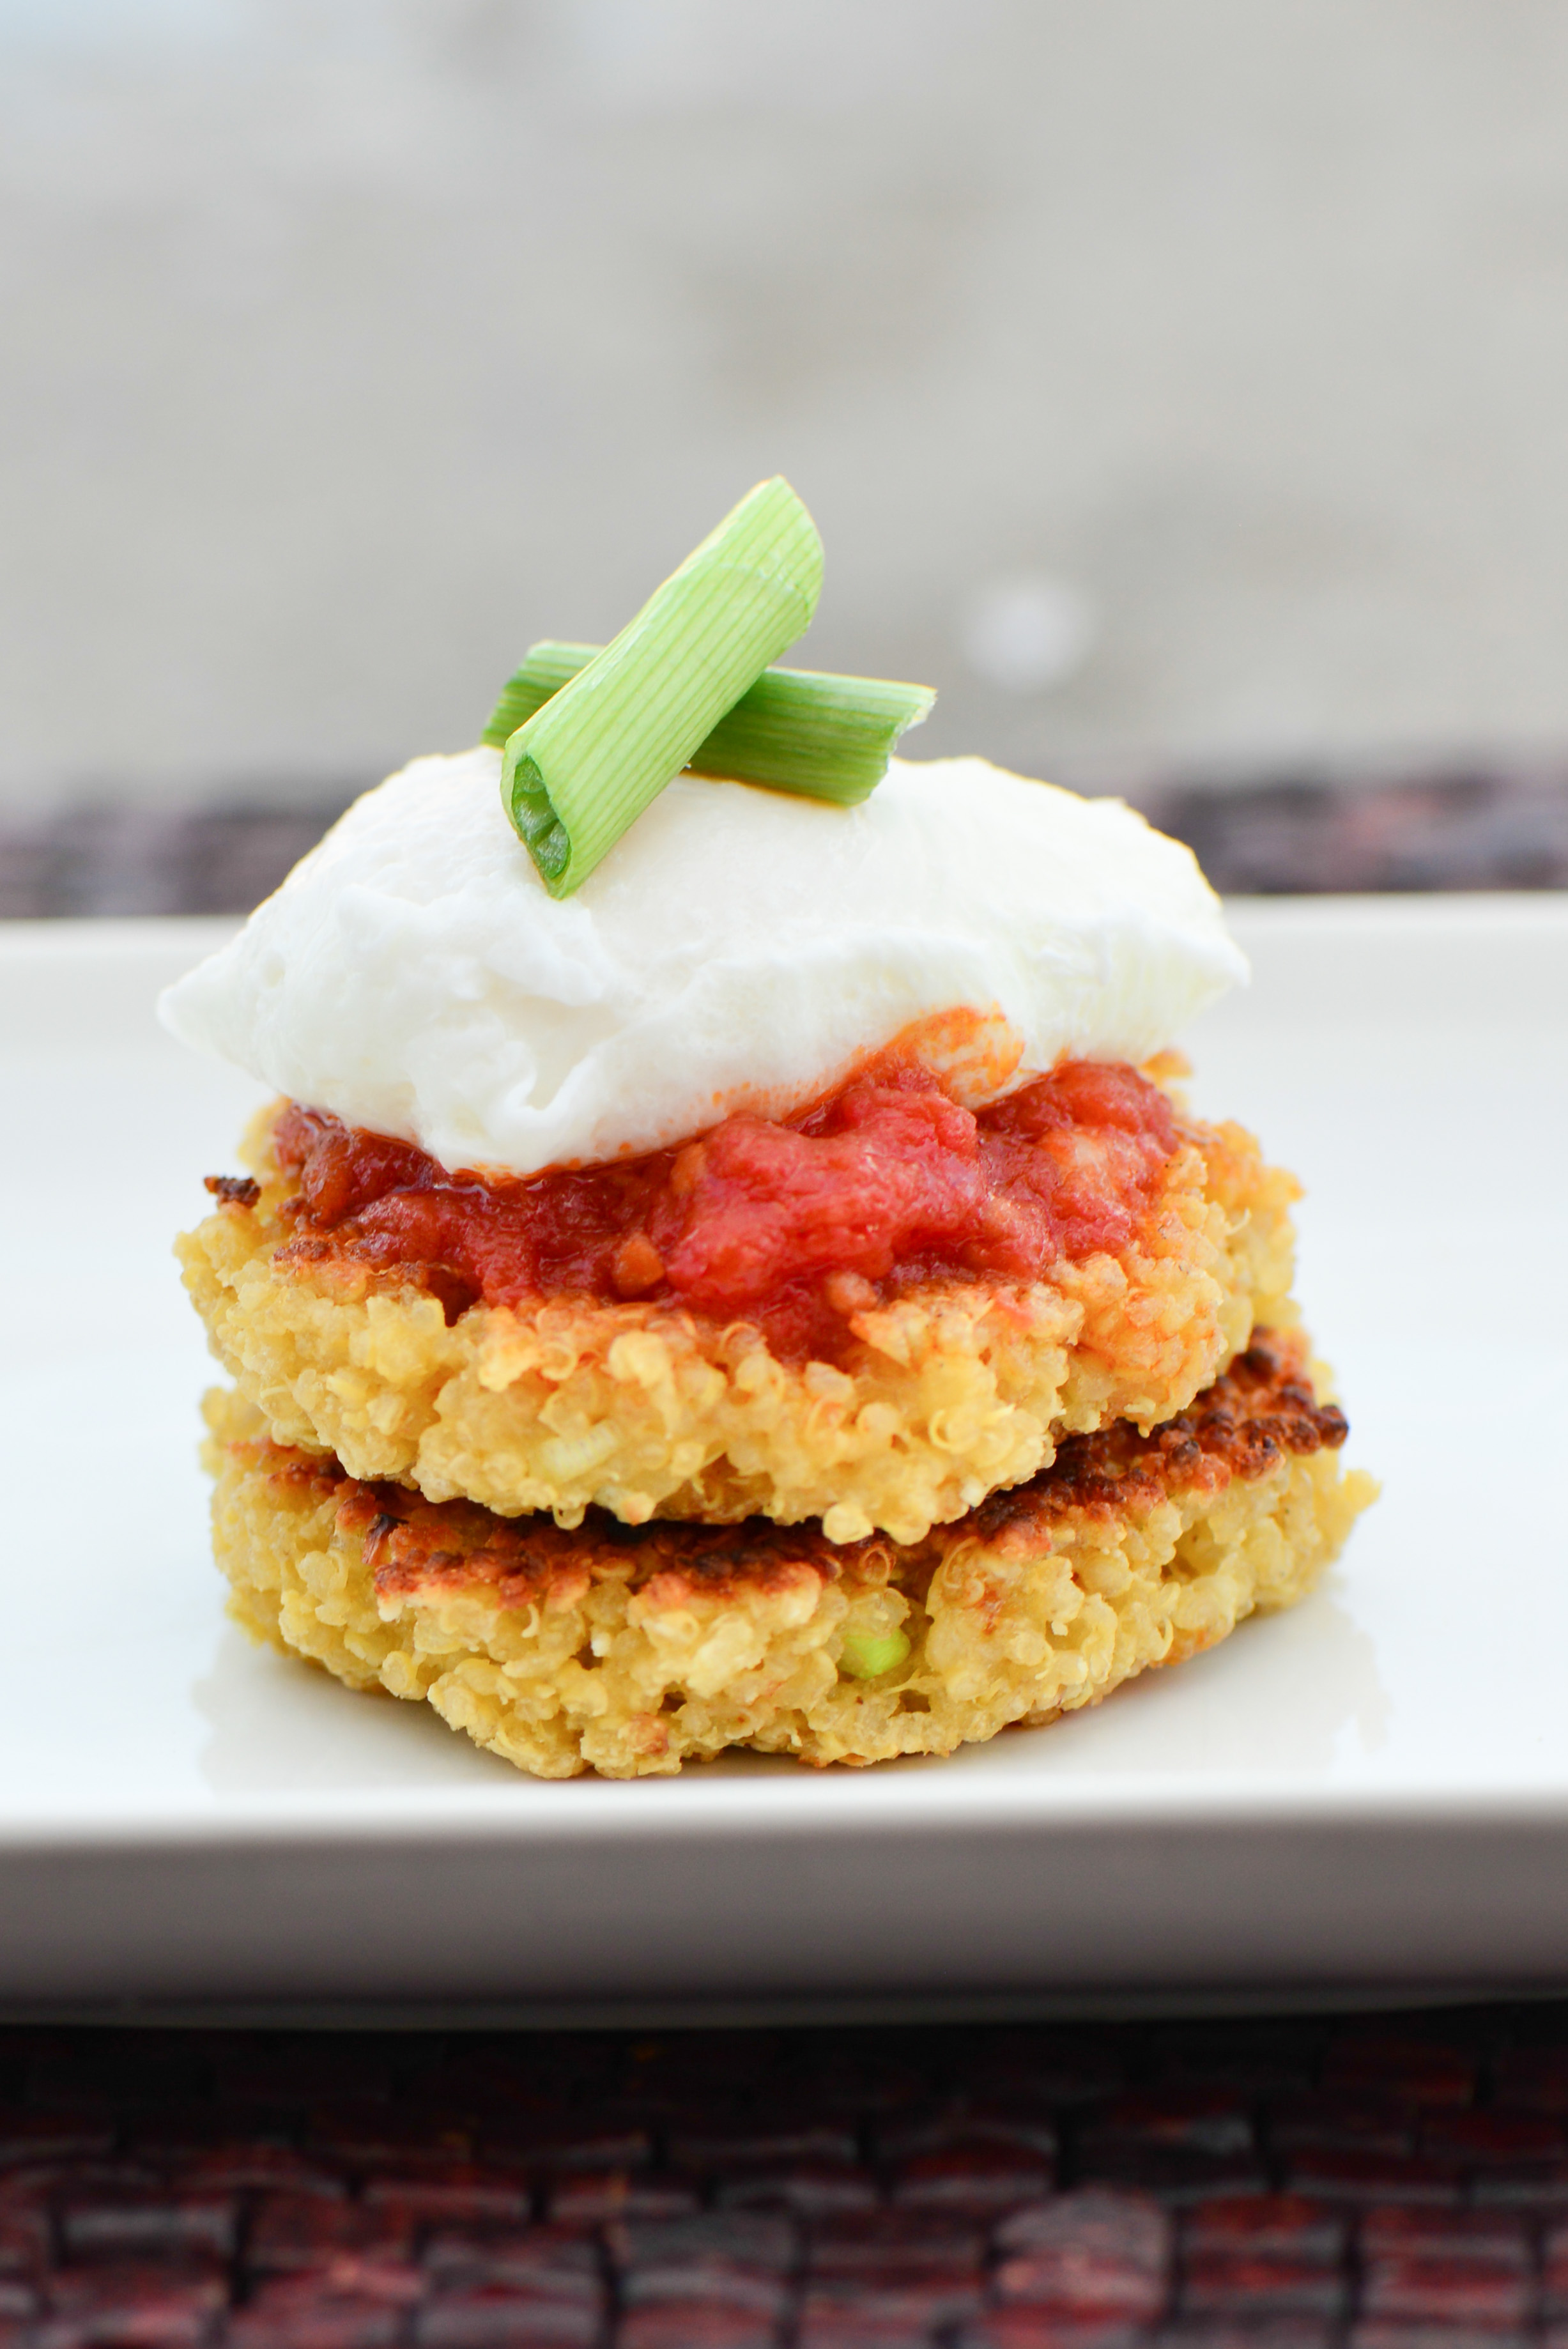 http://culinarymamas.com/wp-content/uploads/2014/01/quinoa-cakes-with-tomato-sauce-and-poached-egg-1-of-21.jpg